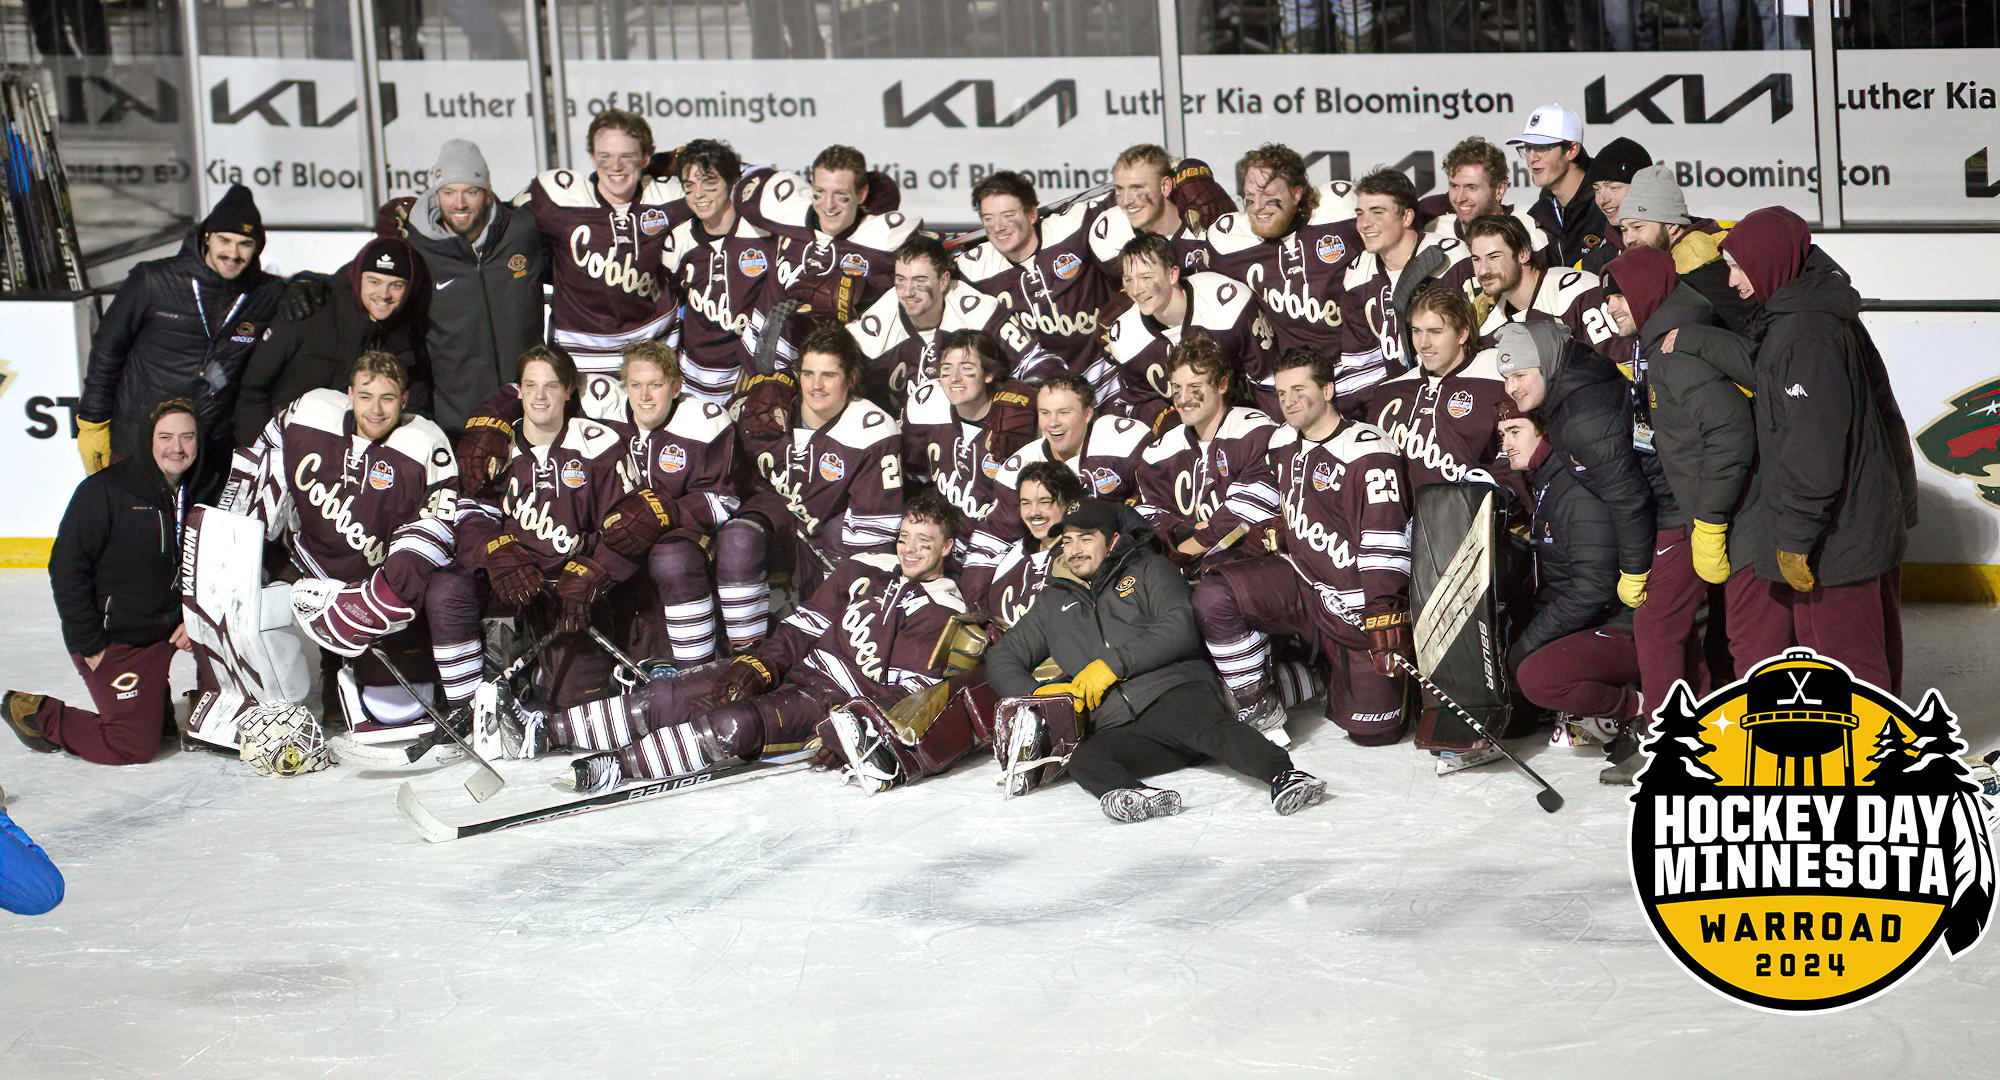 Concordia poses for a team picture after beating St. Olaf 4-2 as part of the annual Hockey Day Minnesota celebration.